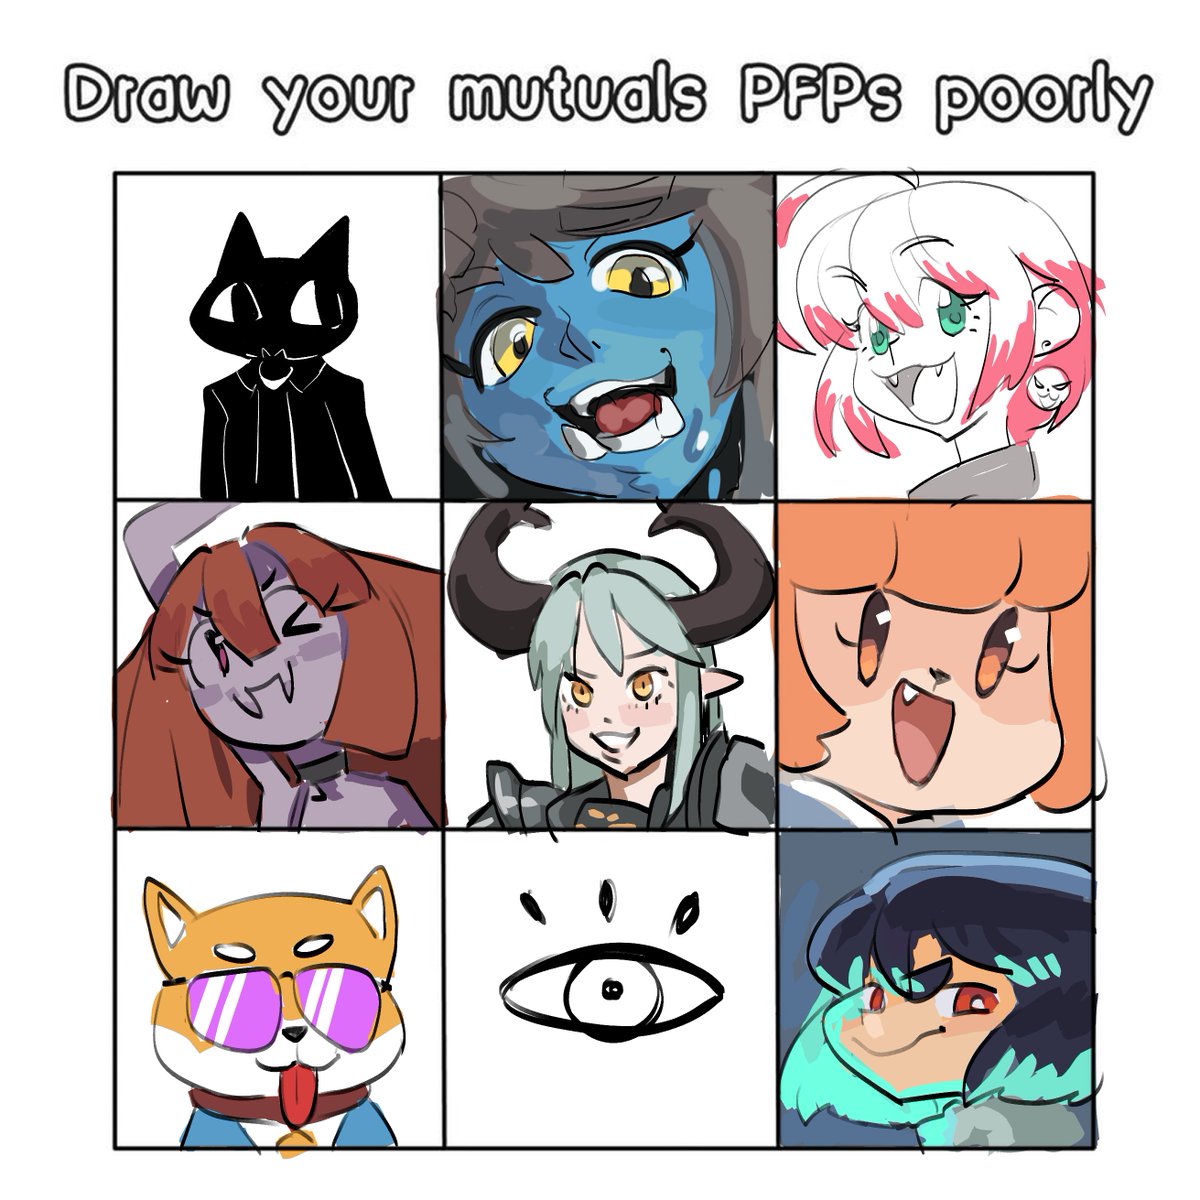 a lot of these aren't poorly drawn, heck
I tried too hard 